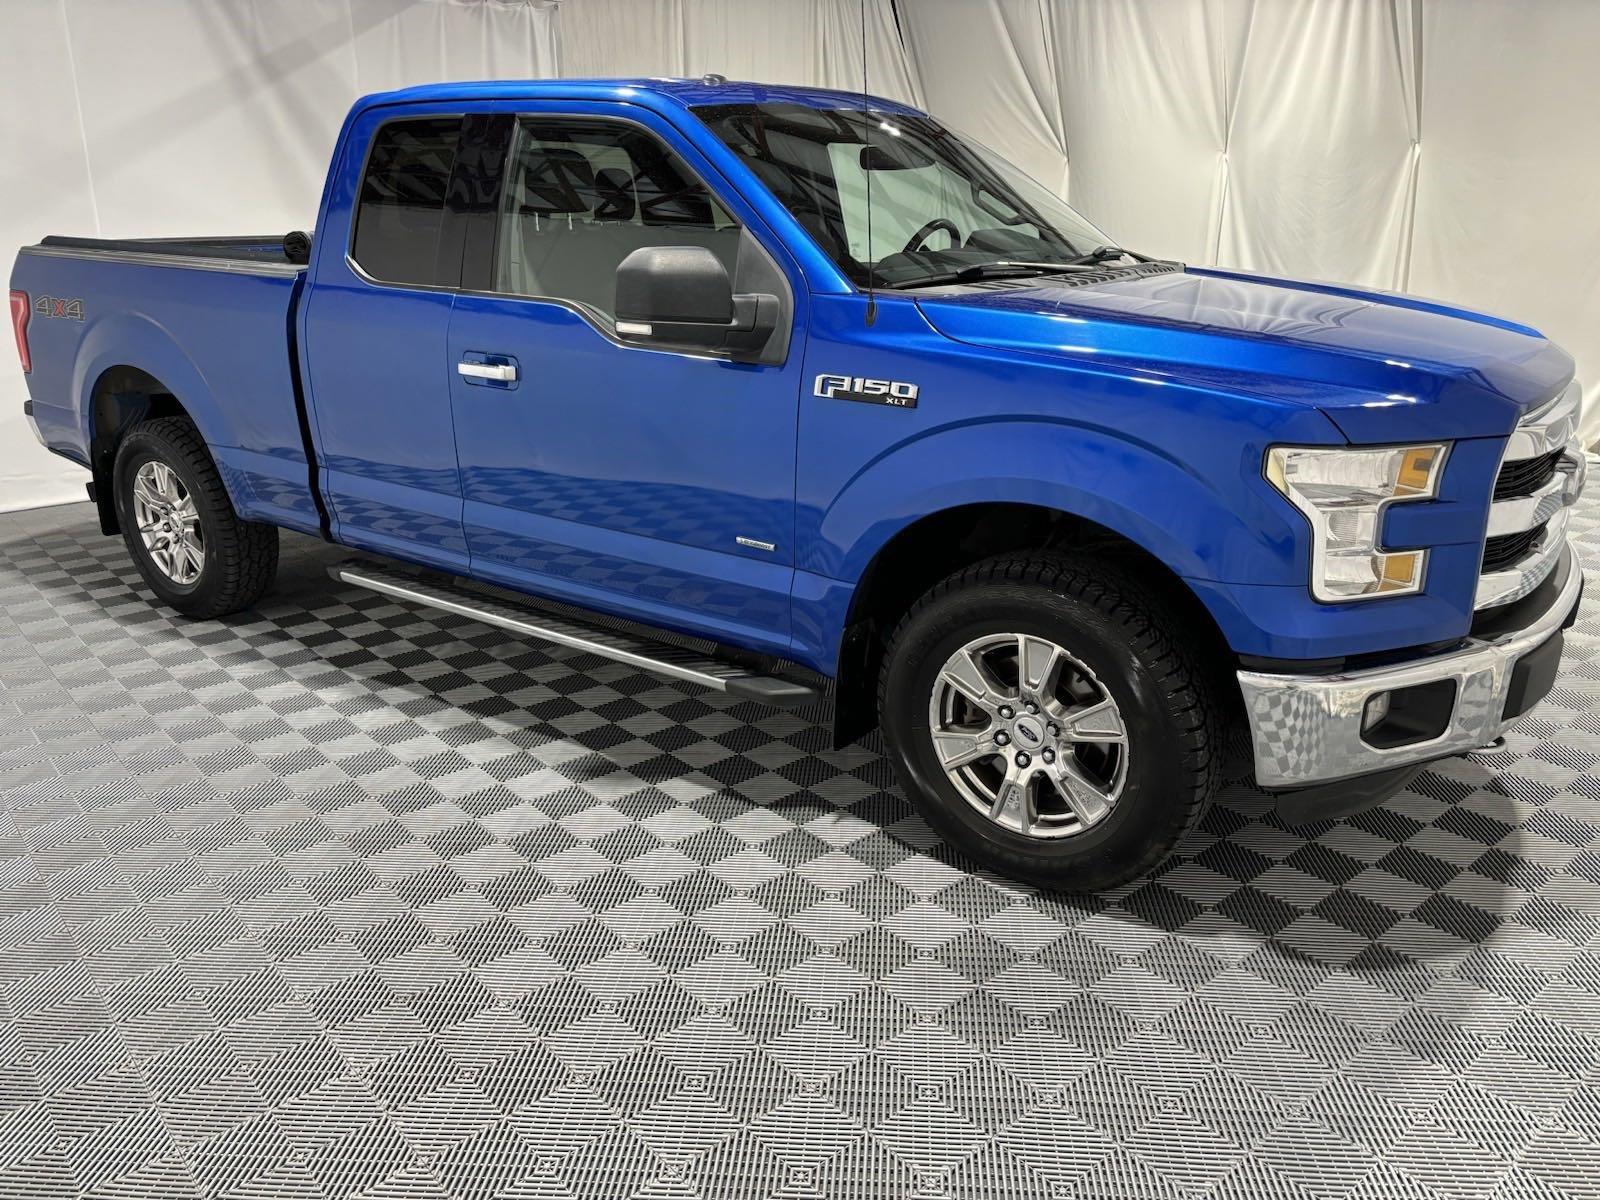 Used 2015 Ford F-150 XLT Super Cab Truck for sale in St Joseph MO